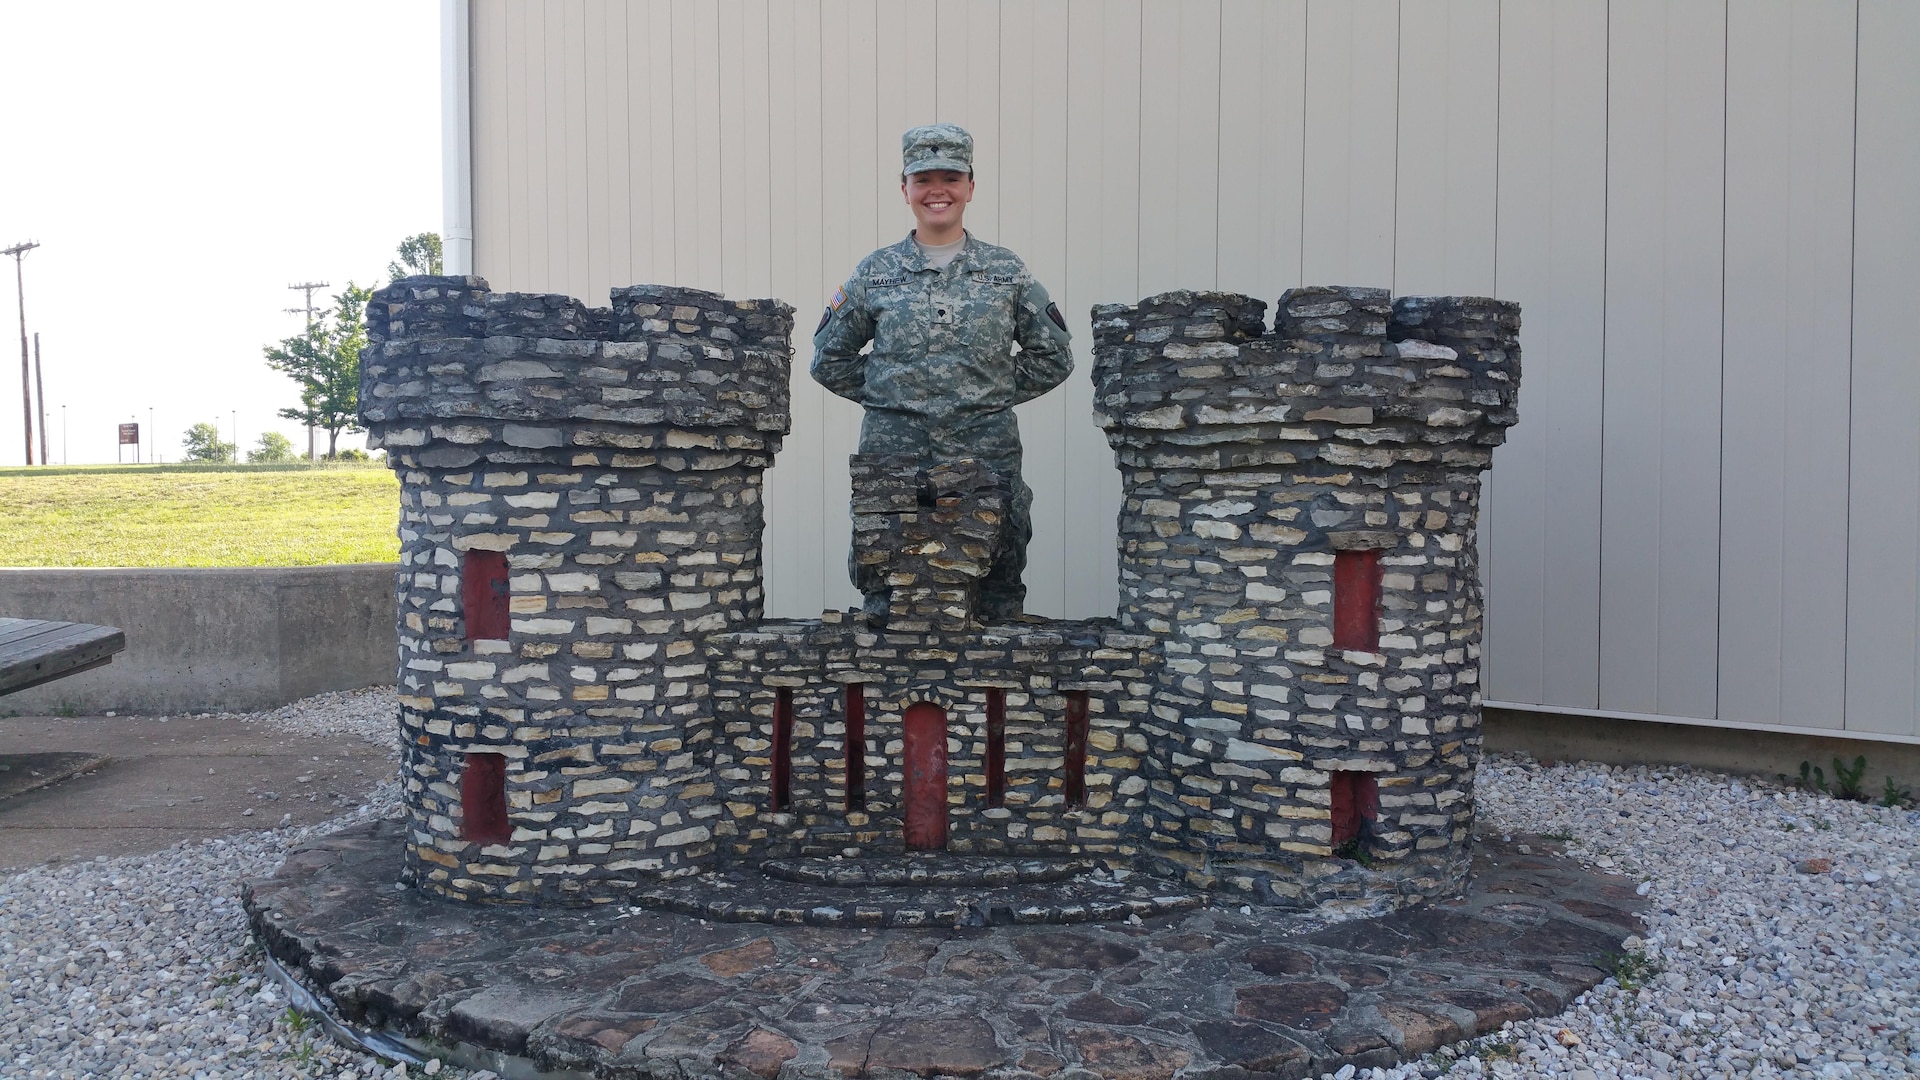 The Texas Army National Guard welcomed Spc. Rachel Mayhew into its ranks as the first woman to be awarded the 12B combat engineer military occupational specialty. Mayhew graduated June 17, 2016, from Fort Leonard Wood, Missouri, during a rigorous two-week MOS transition course that included the High Physical Demands Tests which includes a series of tasks geared toward combat engineers to ensure force capability and readiness.  